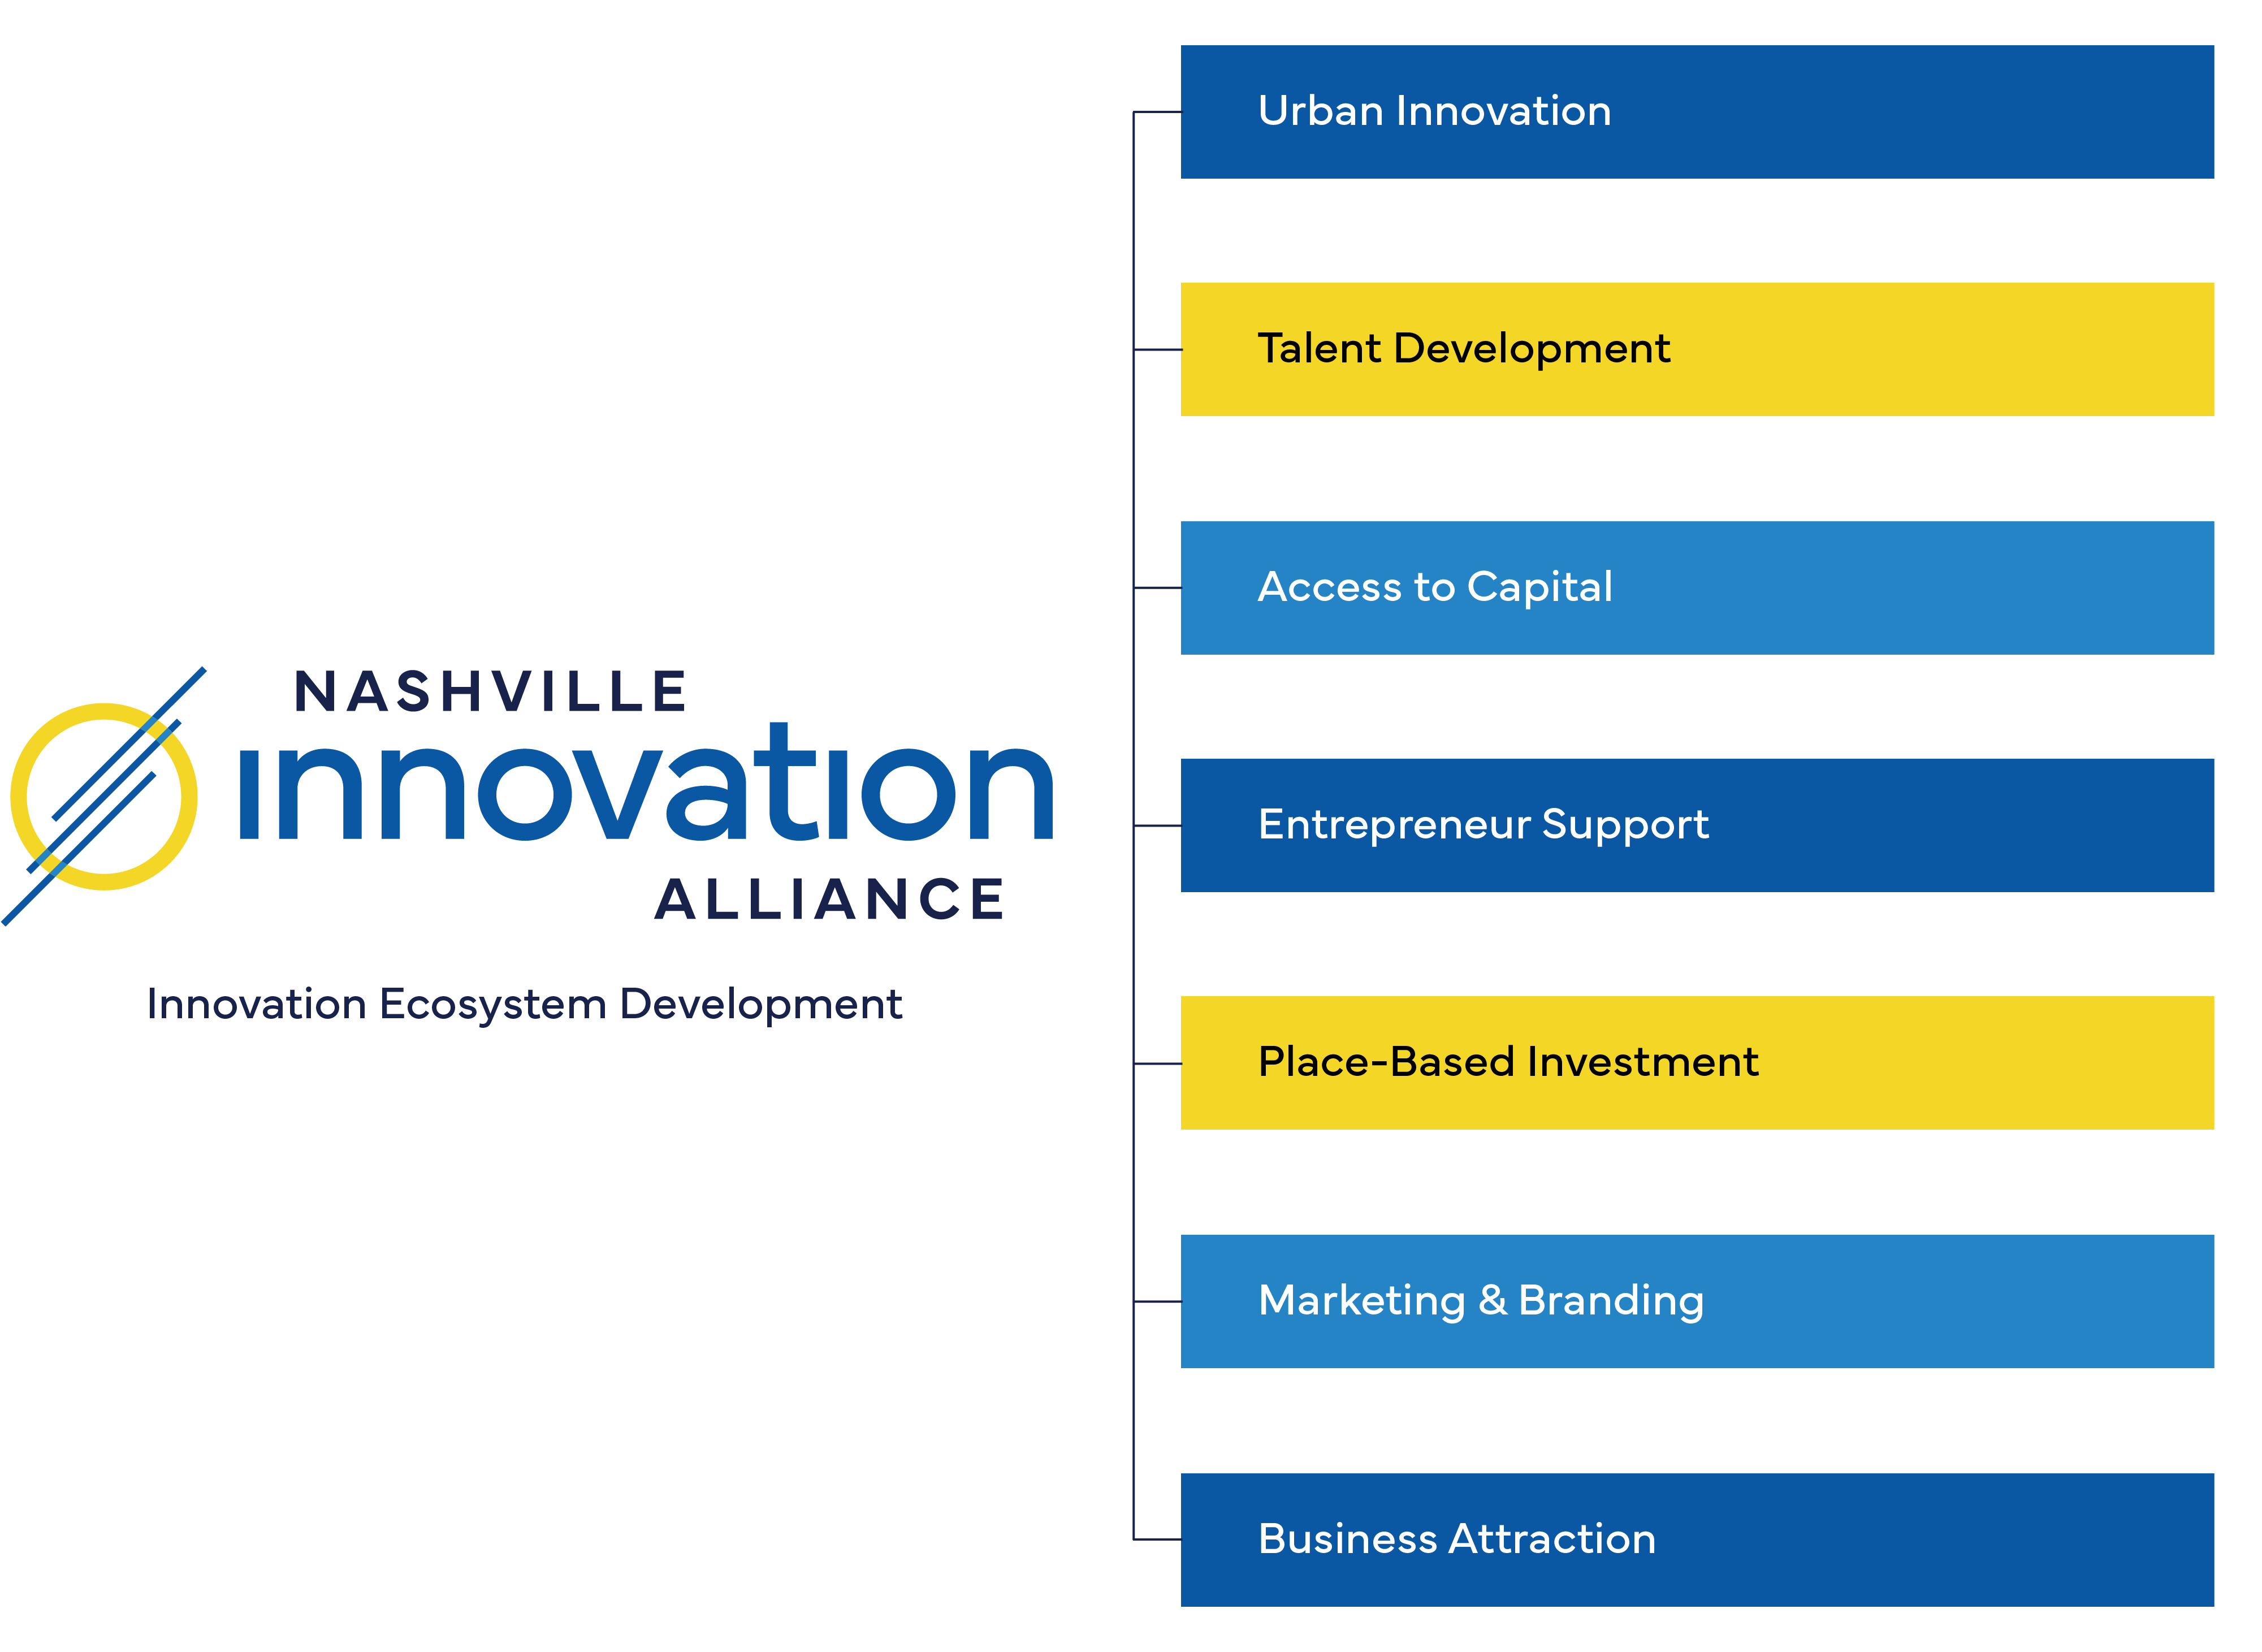 Nashville Innovation Alliance, Innovation Ecosystem Development, Urban Innovation, Talent Development, Access to Capital, Entrepreneur Support, Place-based Investment, Marketing and branding, Business attraction